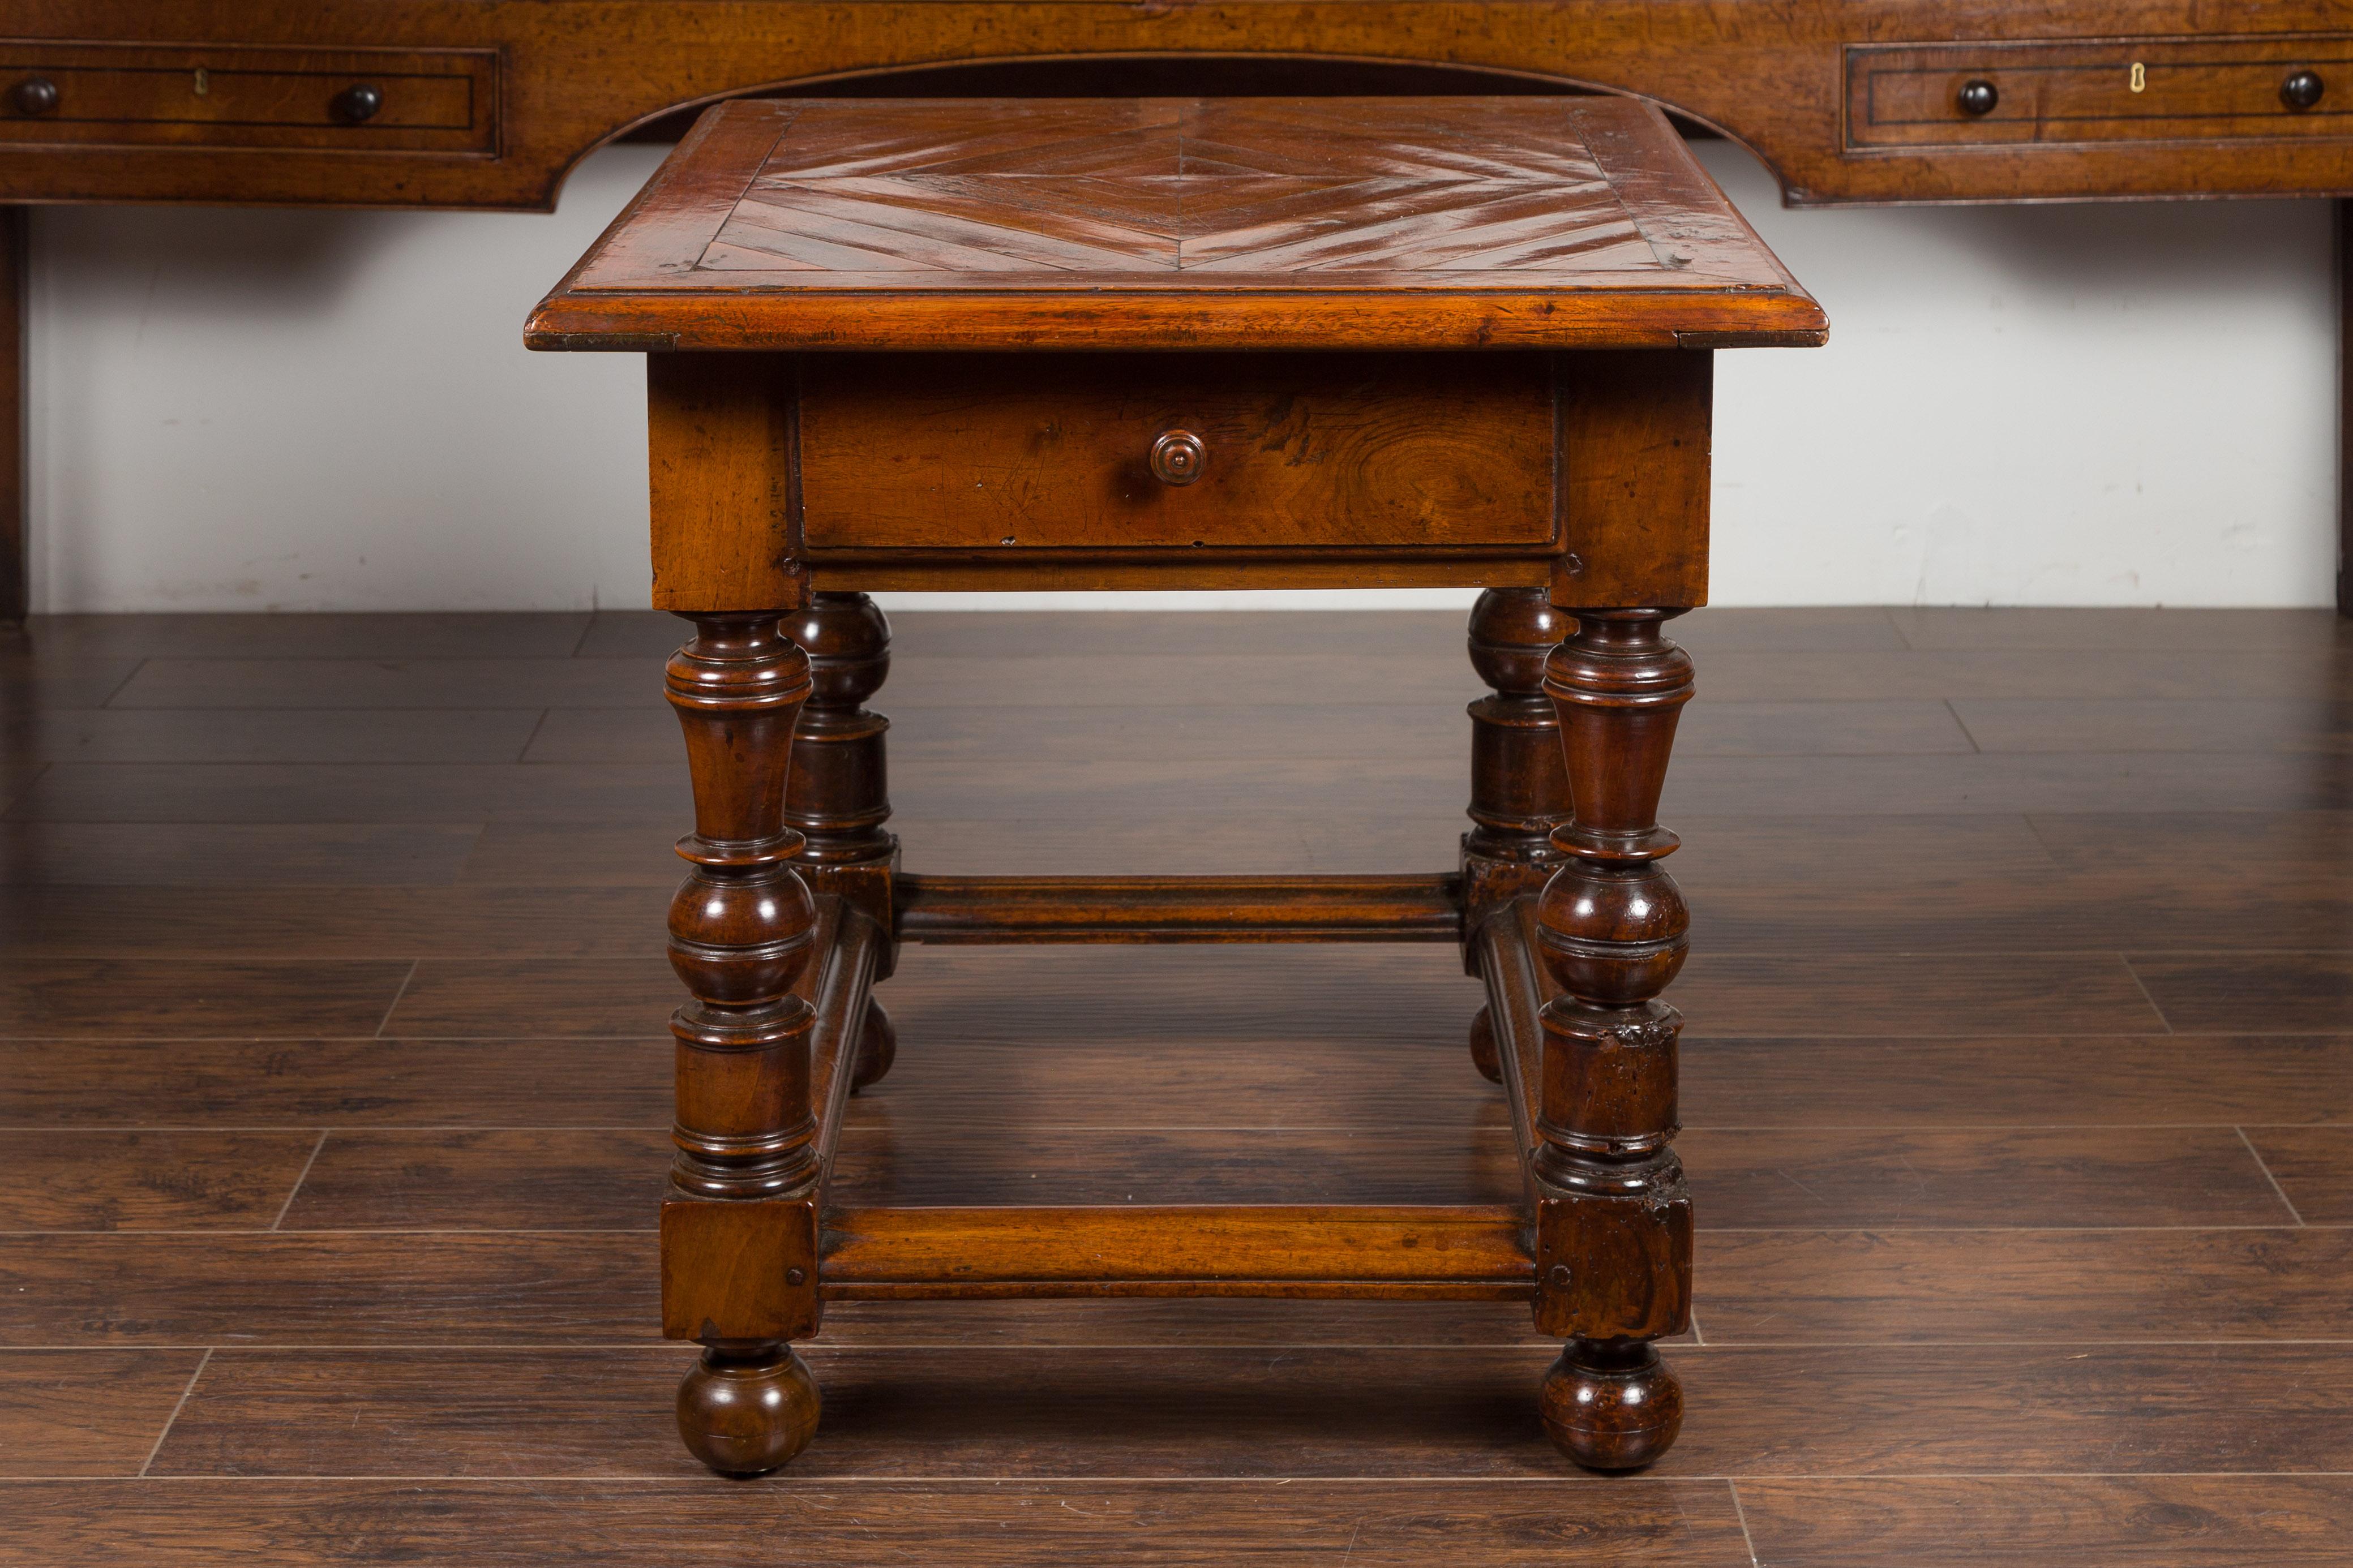 An English walnut parquet top table from the mid-19th century, with single drawer and turned legs. Created in England during the 1850s, this walnut table features an exquisite parquet inlaid rectangular top, sitting above a single drawer fitted with